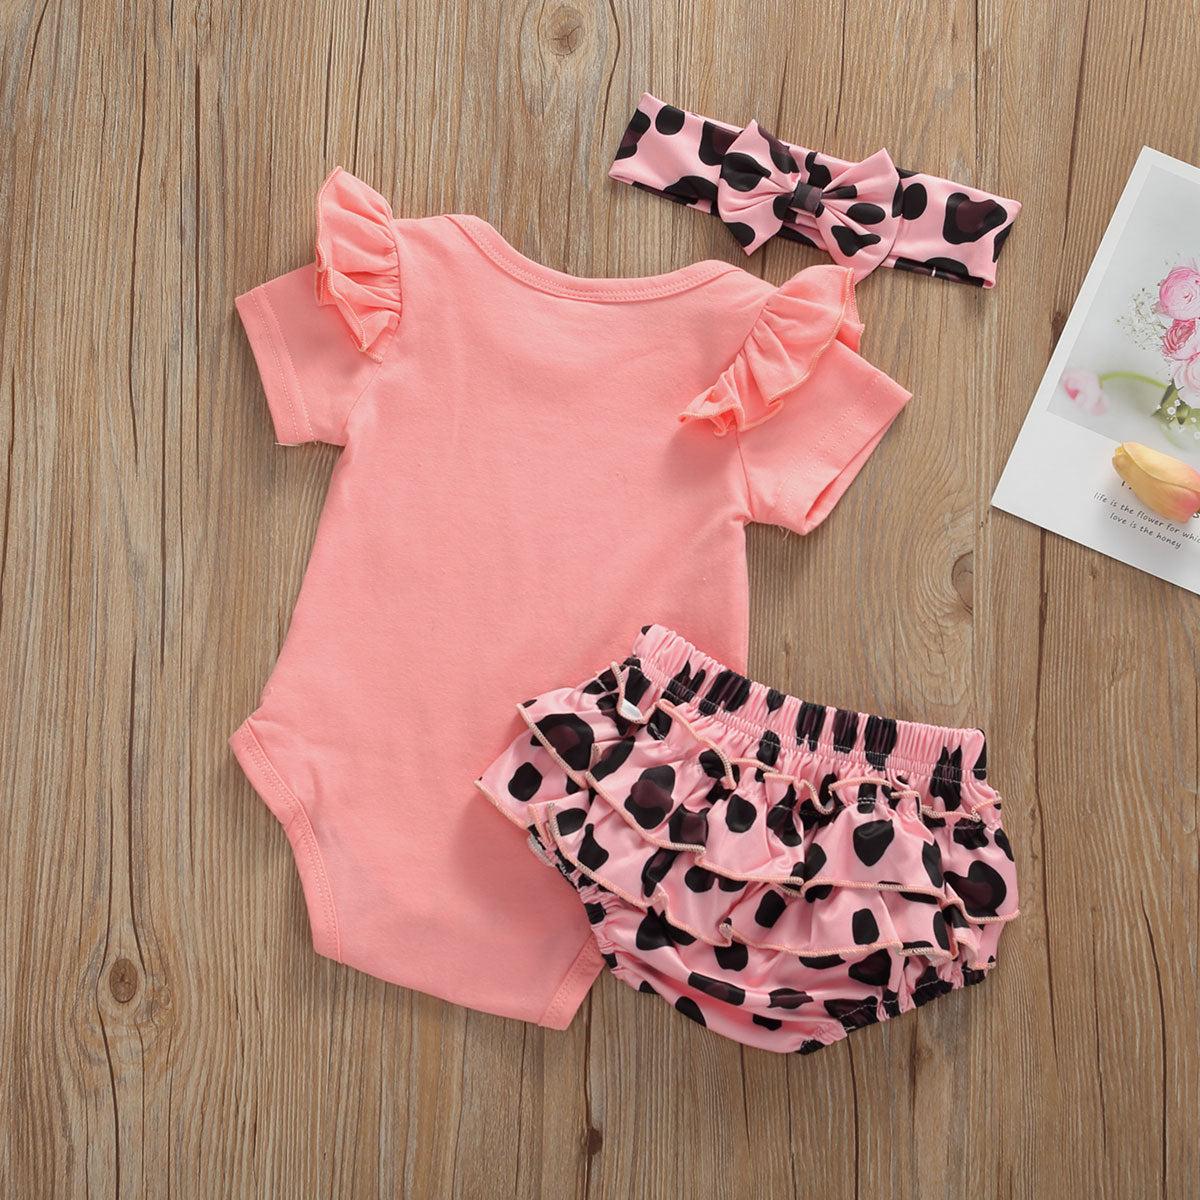 Infant Baby Girls Pink Short Sleeve Suit